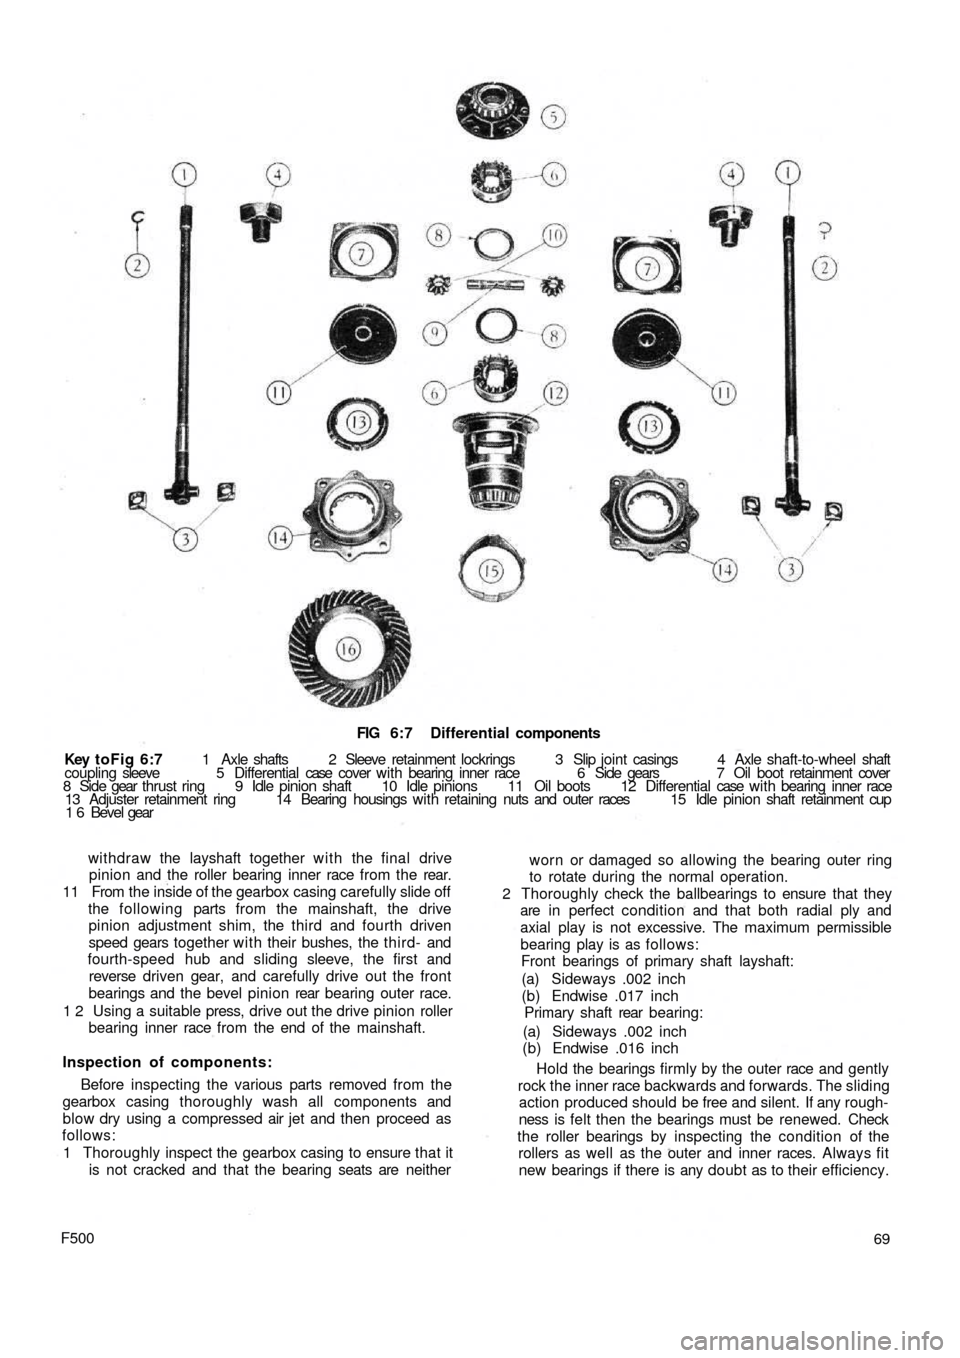 FIAT 500 1966 1.G Workshop Manual FIG 6:7  Differential components
Key toFig  6:7 1  Axle  shafts  2  Sleeve  retainment  lockrings   3   Slip  joint casings  4  Axle  shaft-to-wheel shaft
coupling sleeve  5  Differential case  cover 